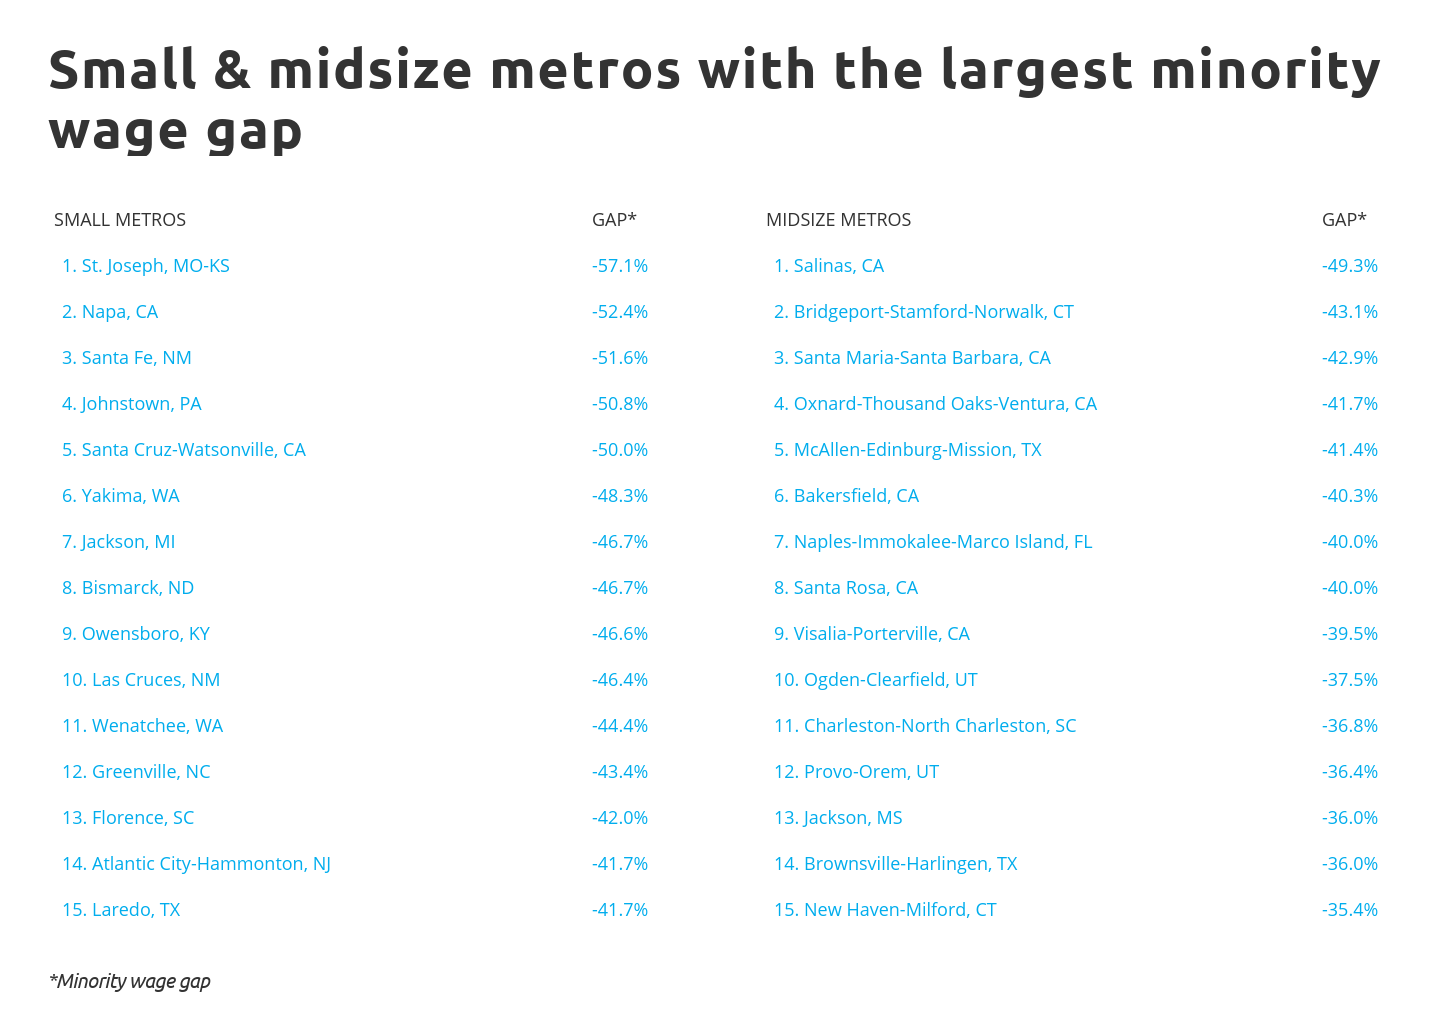 Small and midsize metros with the largest minority wage gap